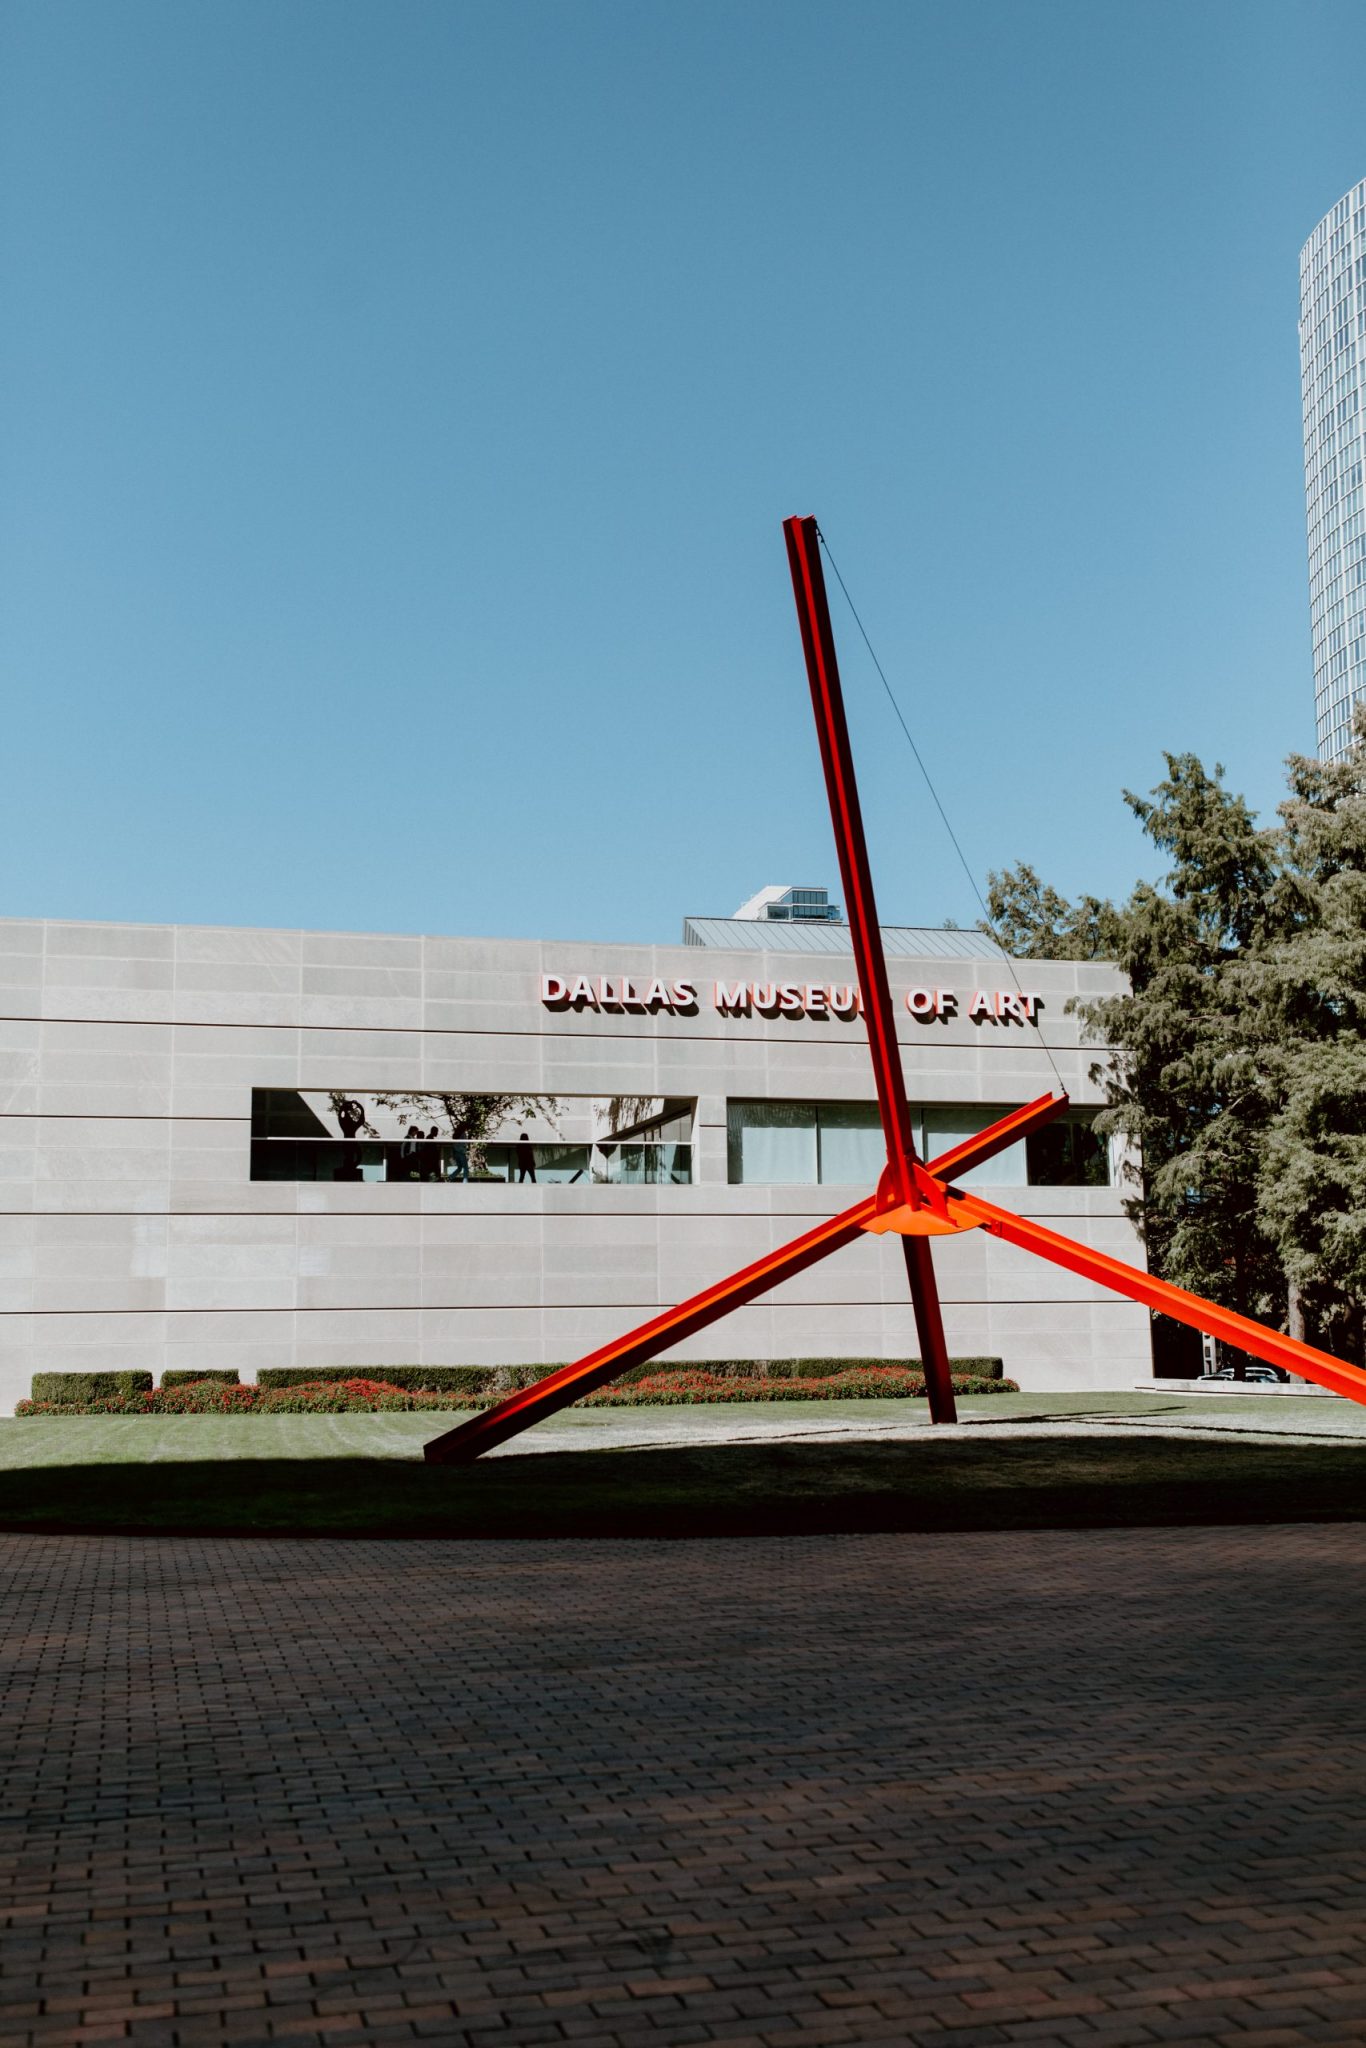 Located in the heart of Dallas’ Arts District